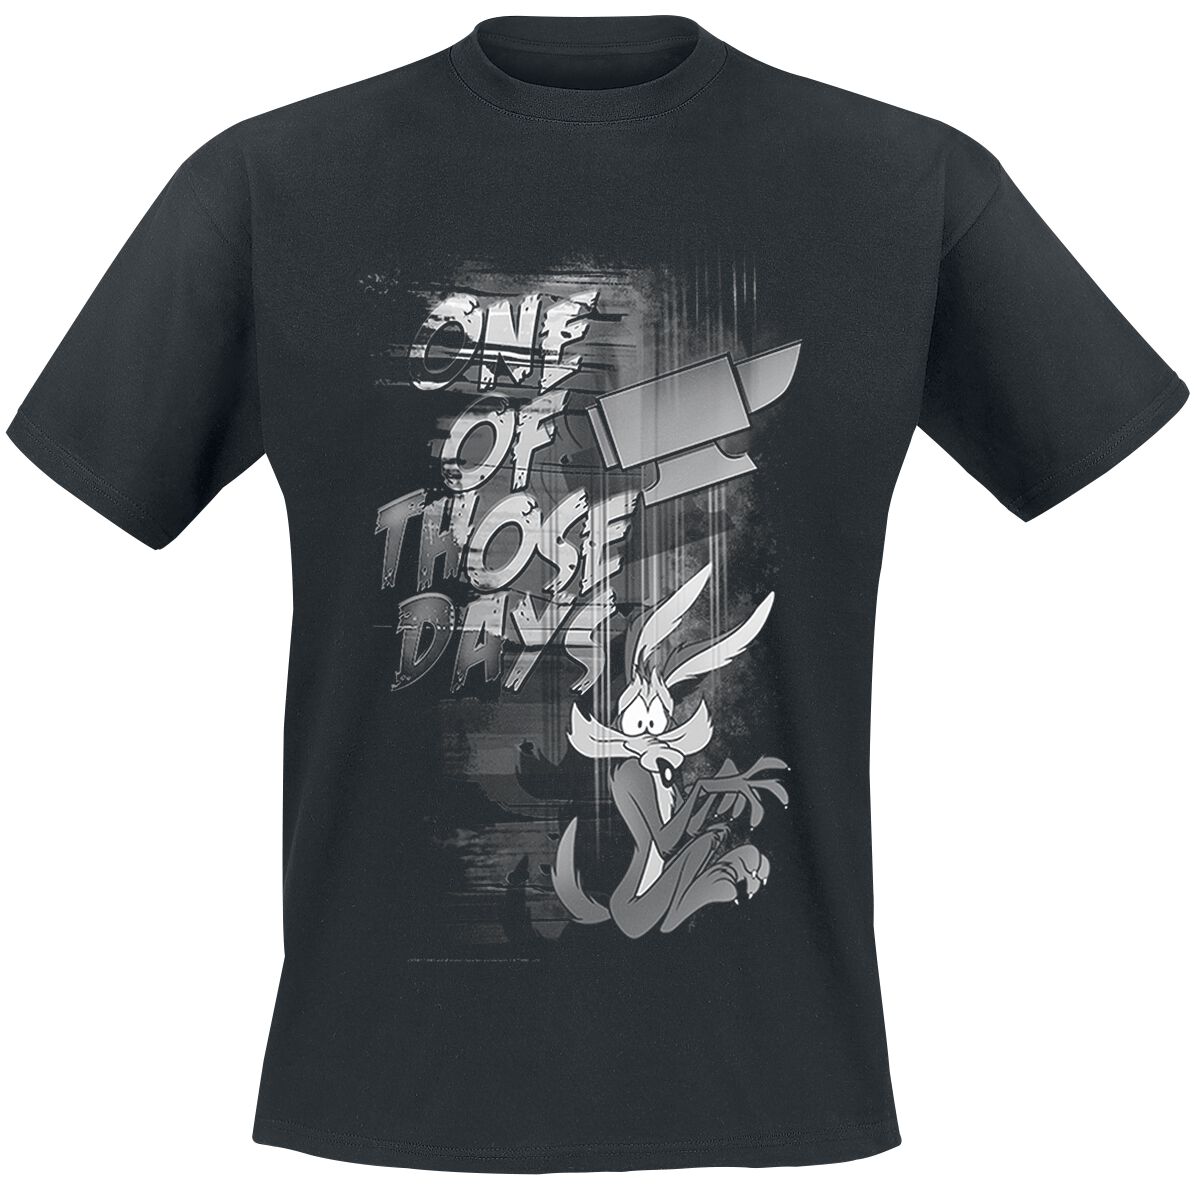 Image of T-Shirt di Looney Tunes - Coyote - Those days - S a XXL - Uomo - nero